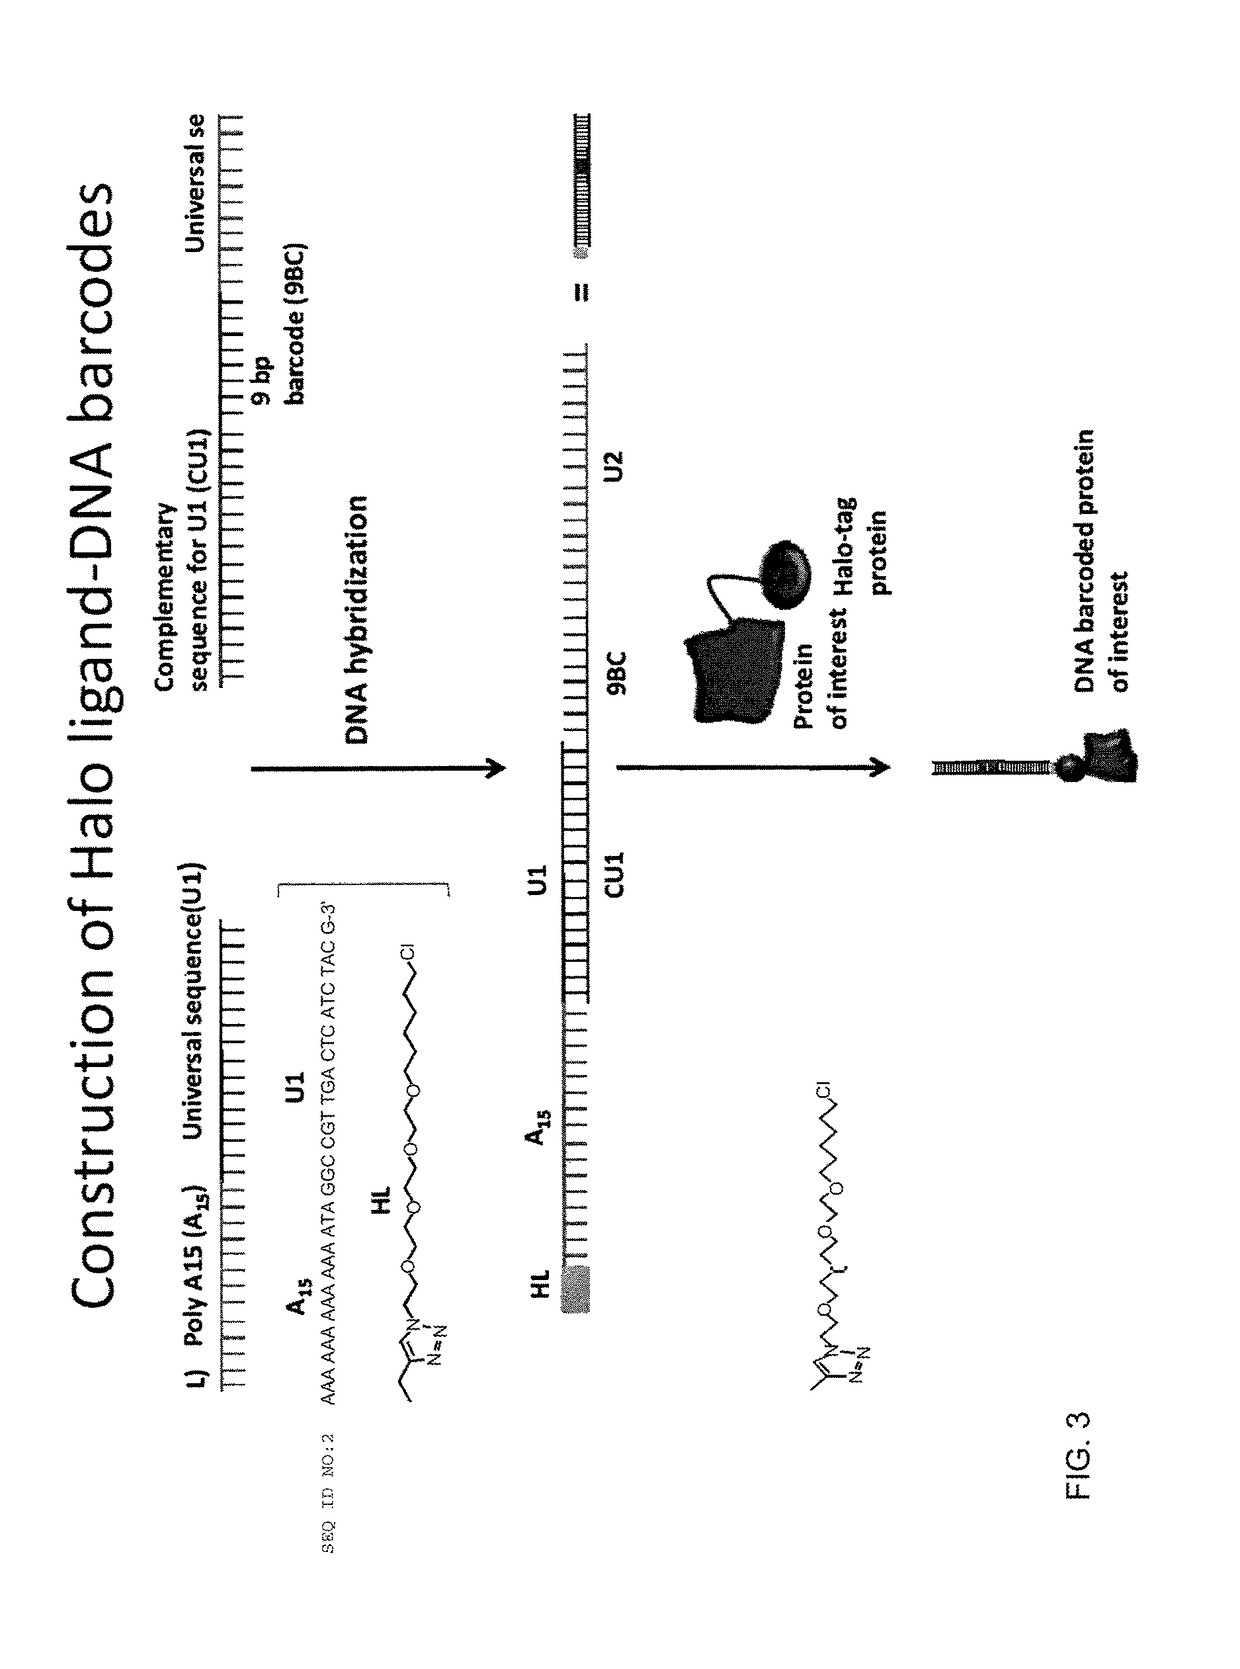 Nucleic acid-tagged compositions and methods for multiplexed protein-protein interaction profiling